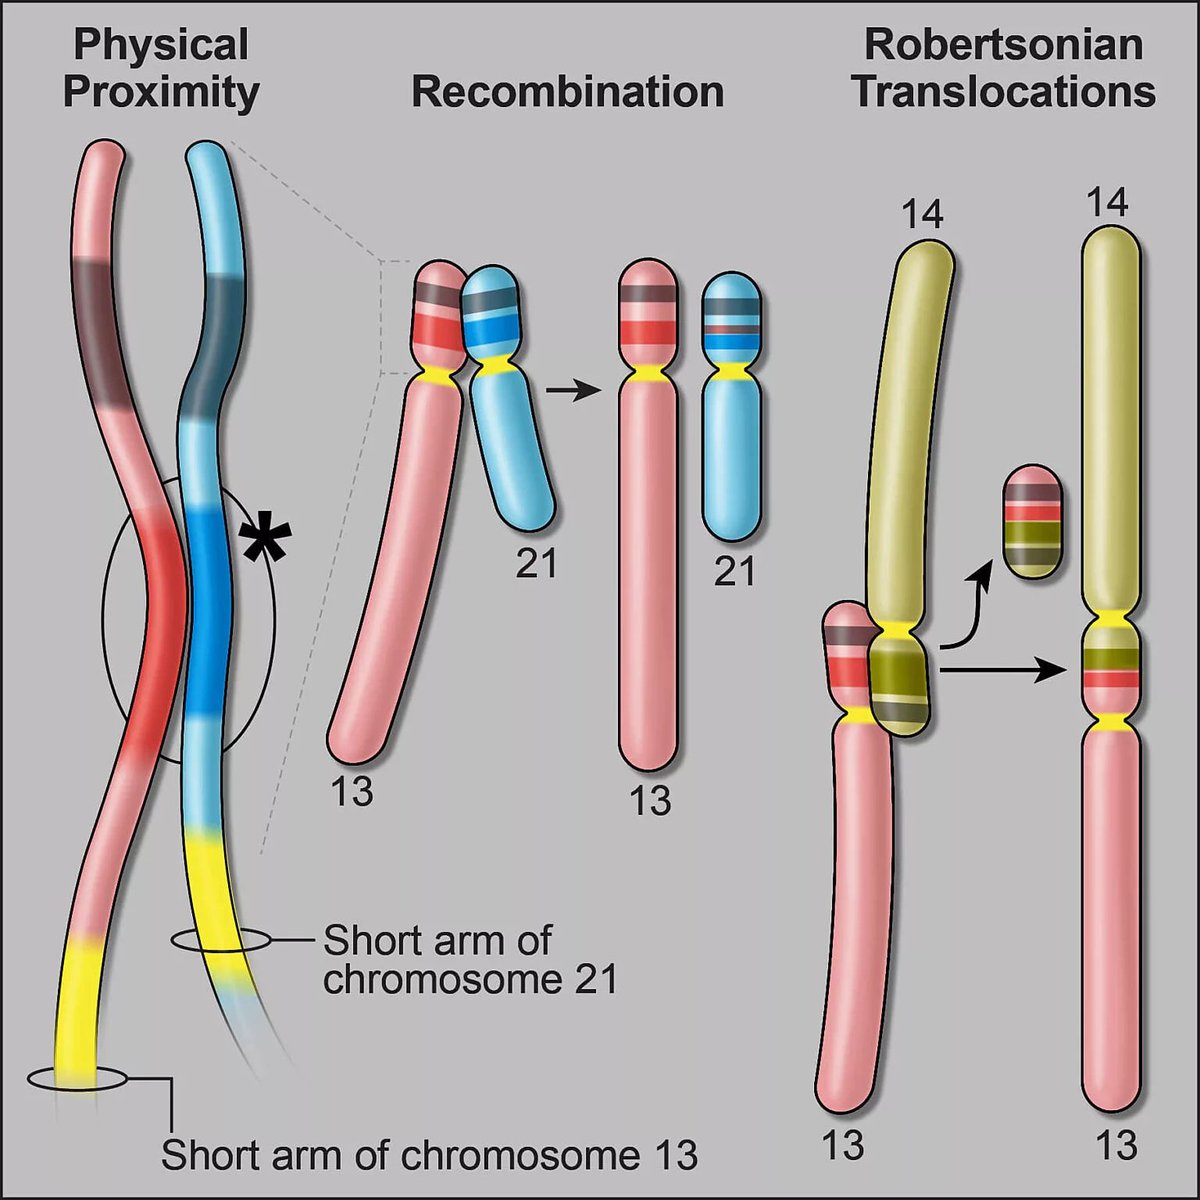 My favorite T2T/Pangenome discovery so far: a multi-megabase inverted segmental duplication on the short arm of chr14 that explains the mechanism of Robertsonian translocations. Great writeup by @ScienceStowers 'Answering a 50-year-old mystery' stowers.org/news/investiga…